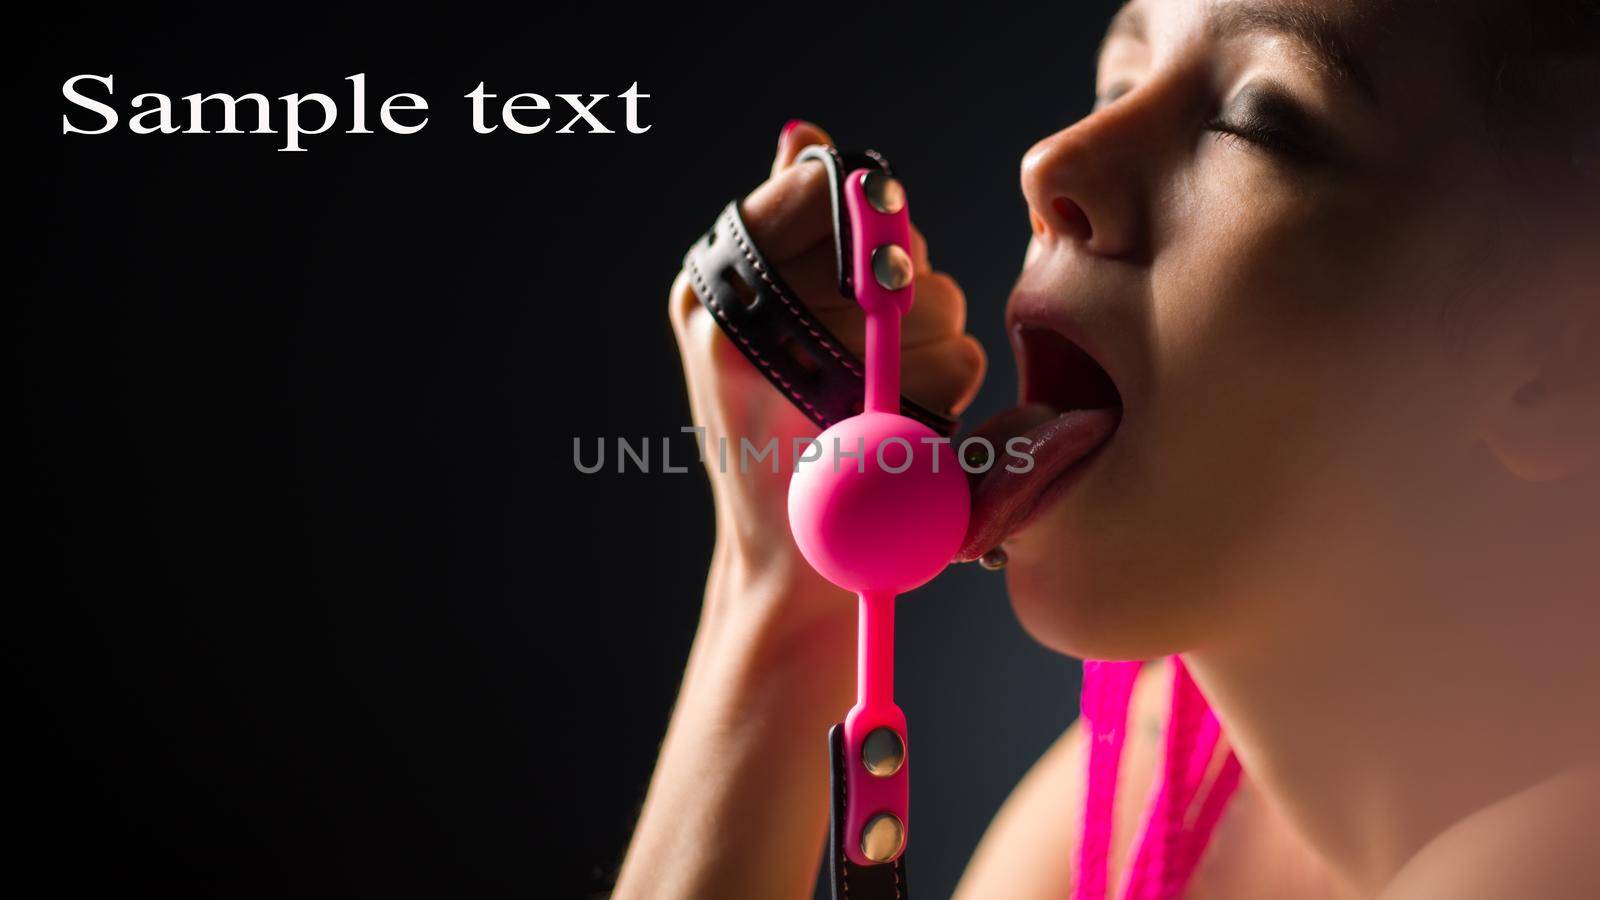 BDSM outfit for adult sex games. A young woman licks pink gag ball by zartarn